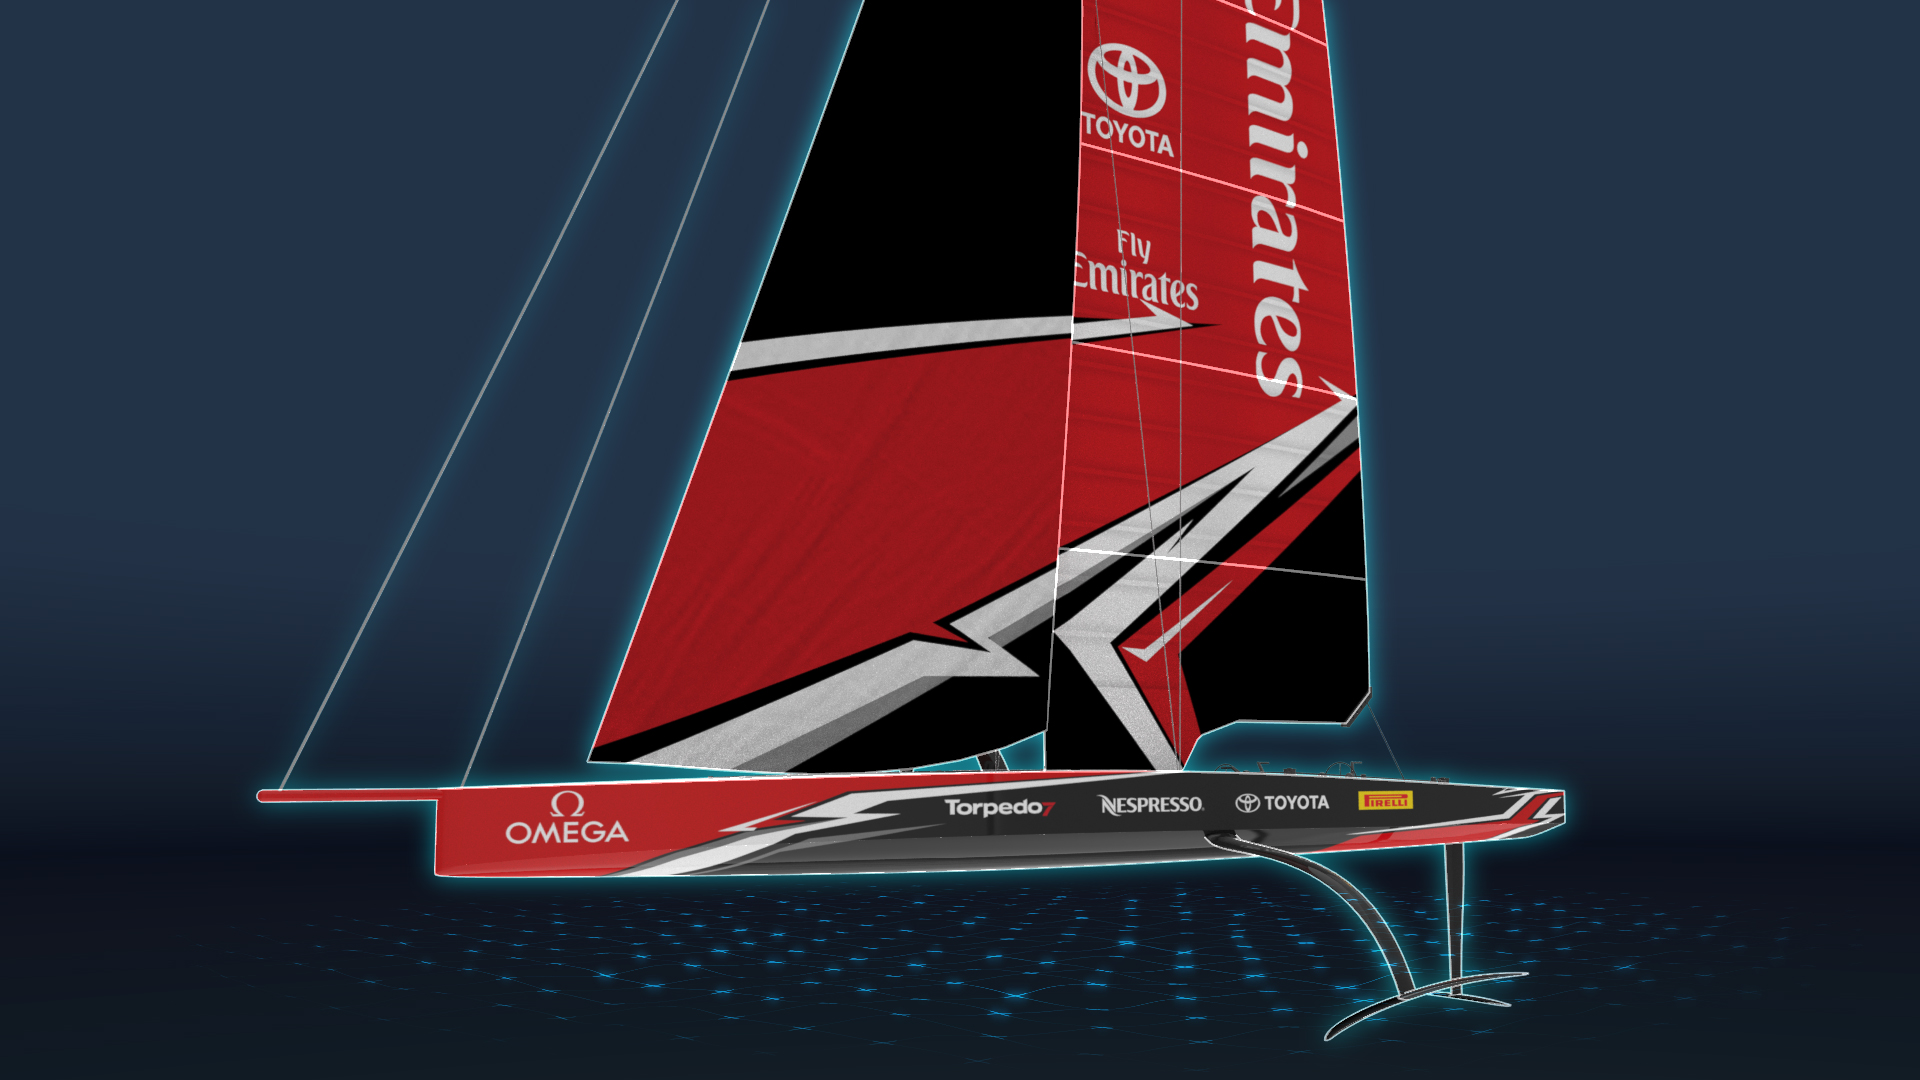 The concept for the AC75, the class of boat to be sailed in the 36th America’s Cup 2021 in Auckland / New Zealand